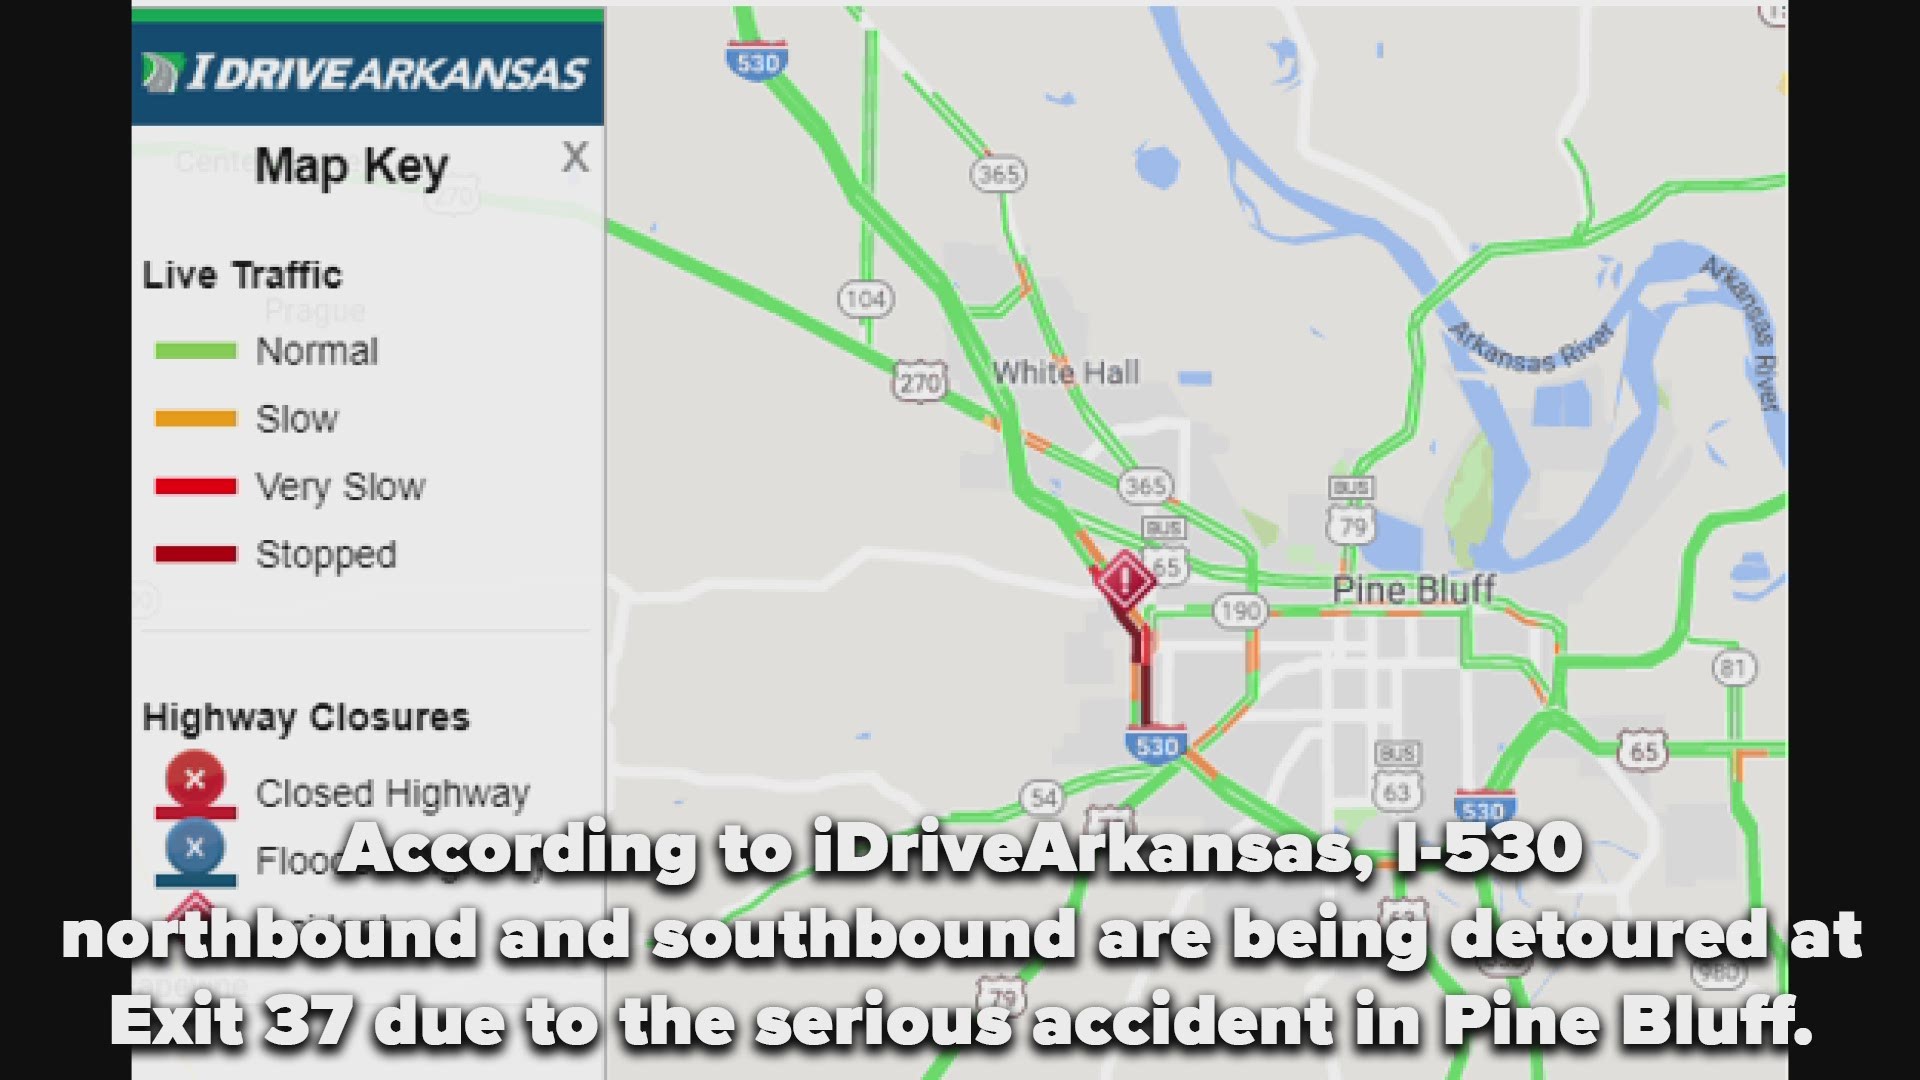 According to iDriveArkansas, I-530 northbound and southbound are being detoured due to a serious accident in Pine Bluff.